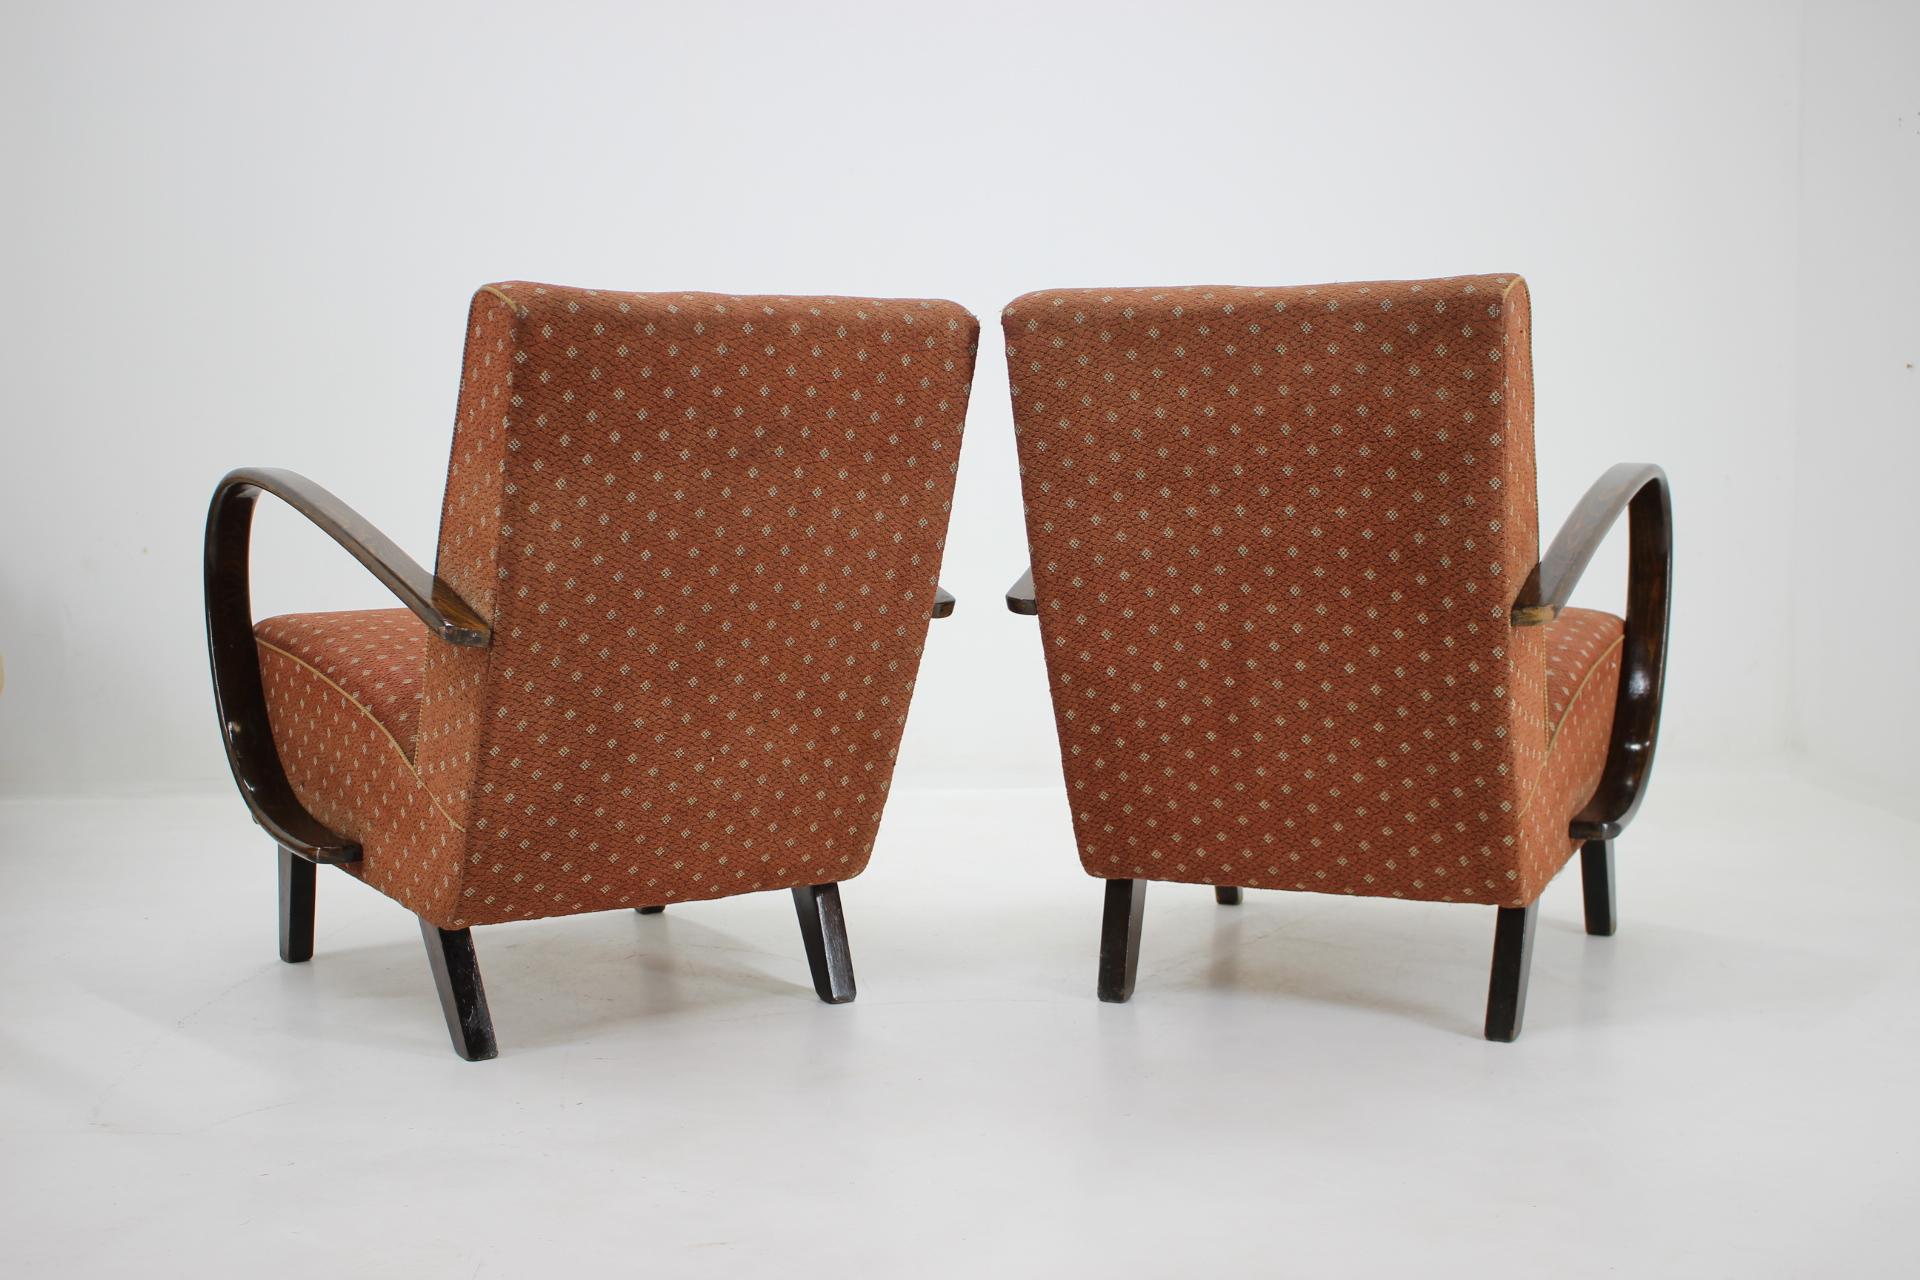 - made of beech wood - good original upholstery with signs of use 
- made in Czechoslovakia 
- suitable for re-upholstery